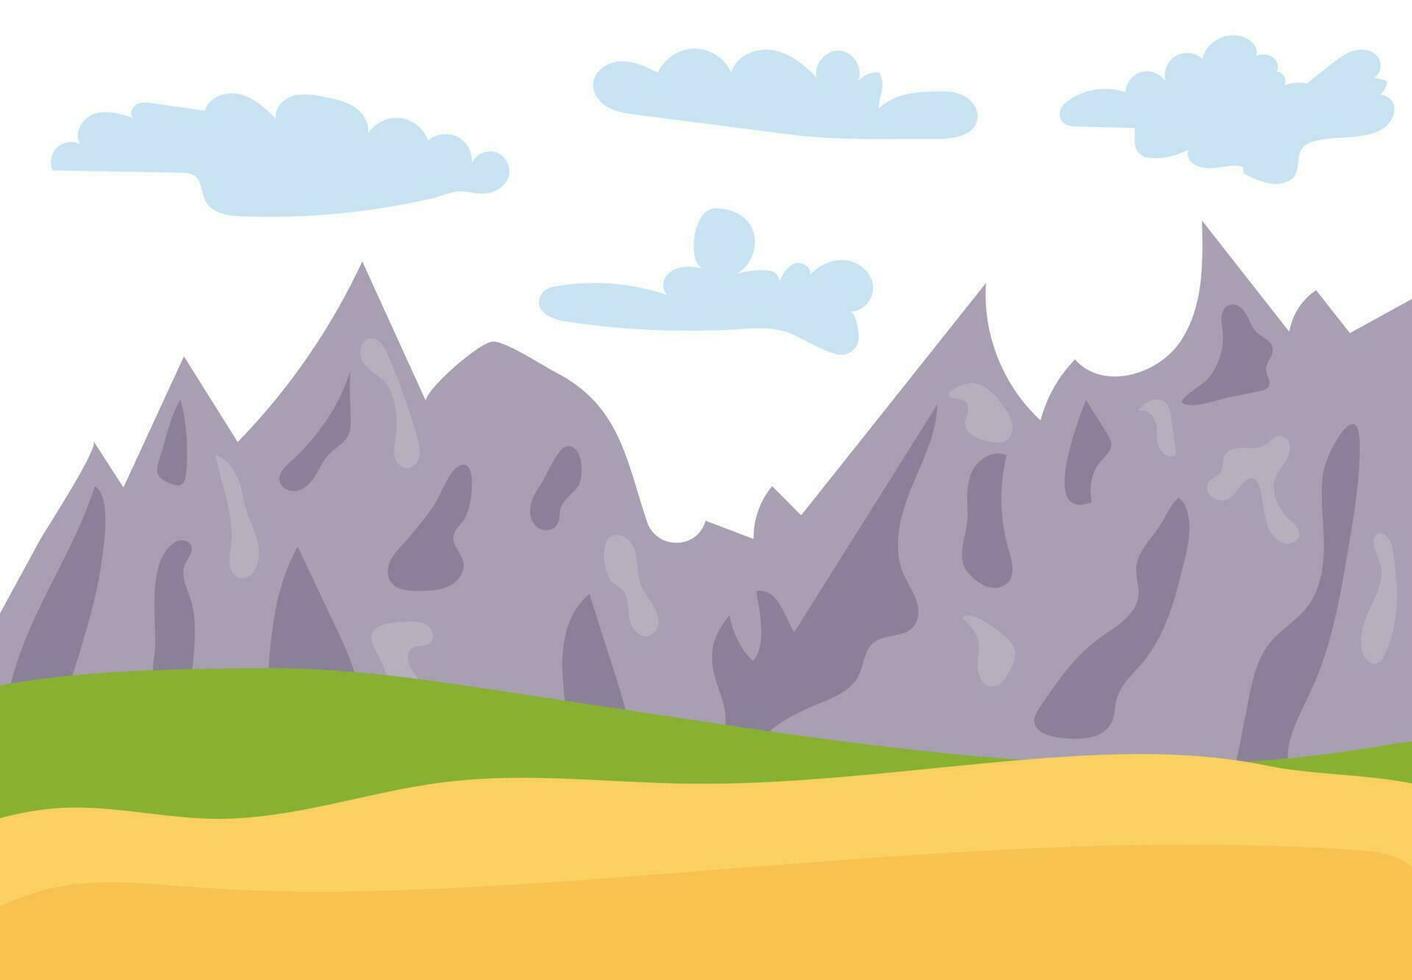 Natural cartoon landscape in the flat style with mountains, blue sky, clouds and hills. Vector illustration